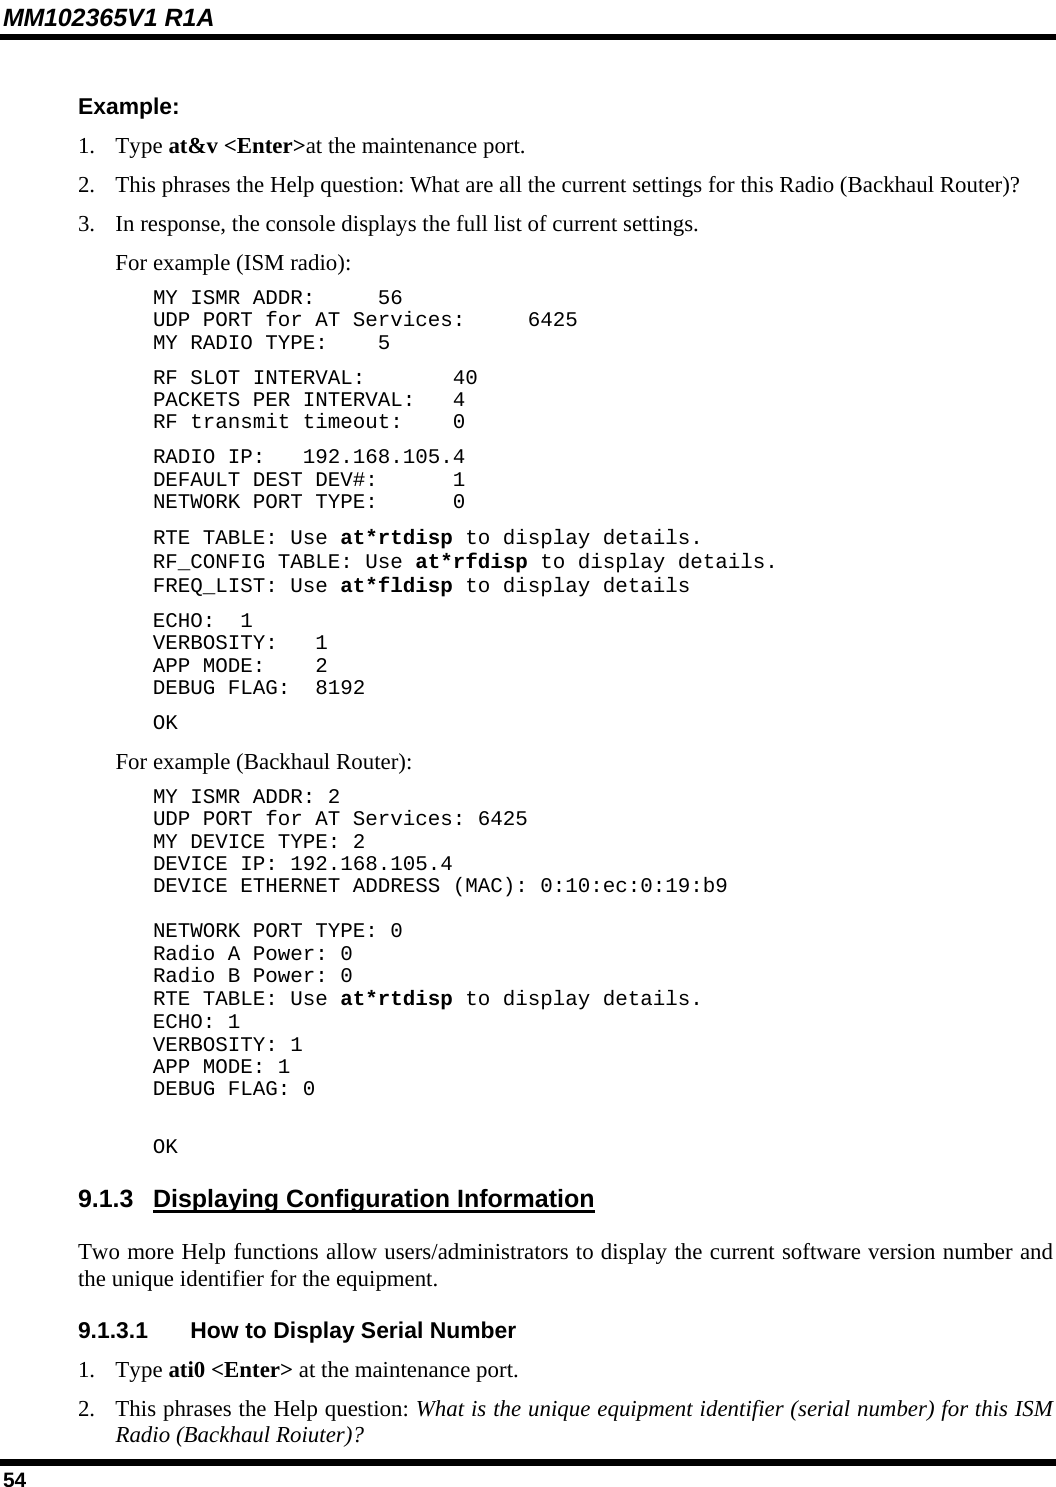 MM102365V1 R1A Example: 1. Type at&amp;v &lt;Enter&gt;at the maintenance port. 2.  This phrases the Help question: What are all the current settings for this Radio (Backhaul Router)? 3.  In response, the console displays the full list of current settings.  For example (ISM radio): MY ISMR ADDR:   56 UDP PORT for AT Services:   6425 MY RADIO TYPE:   5 RF SLOT INTERVAL:   40 PACKETS PER INTERVAL:   4 RF transmit timeout:   0 RADIO IP:   192.168.105.4 DEFAULT DEST DEV#:   1 NETWORK PORT TYPE:   0 RTE TABLE: Use at*rtdisp to display details. RF_CONFIG TABLE: Use at*rfdisp to display details. FREQ_LIST: Use at*fldisp to display details ECHO:  1 VERBOSITY:  1 APP MODE:   2 DEBUG FLAG:  8192 OK For example (Backhaul Router): MY ISMR ADDR: 2 UDP PORT for AT Services: 6425 MY DEVICE TYPE: 2 DEVICE IP: 192.168.105.4 DEVICE ETHERNET ADDRESS (MAC): 0:10:ec:0:19:b9  NETWORK PORT TYPE: 0 Radio A Power: 0 Radio B Power: 0 RTE TABLE: Use at*rtdisp to display details. ECHO: 1 VERBOSITY: 1 APP MODE: 1 DEBUG FLAG: 0  OK 9.1.3  Displaying Configuration Information Two more Help functions allow users/administrators to display the current software version number and the unique identifier for the equipment. 9.1.3.1  How to Display Serial Number 1. Type ati0 &lt;Enter&gt; at the maintenance port. 2.  This phrases the Help question: What is the unique equipment identifier (serial number) for this ISM Radio (Backhaul Roiuter)? 54 